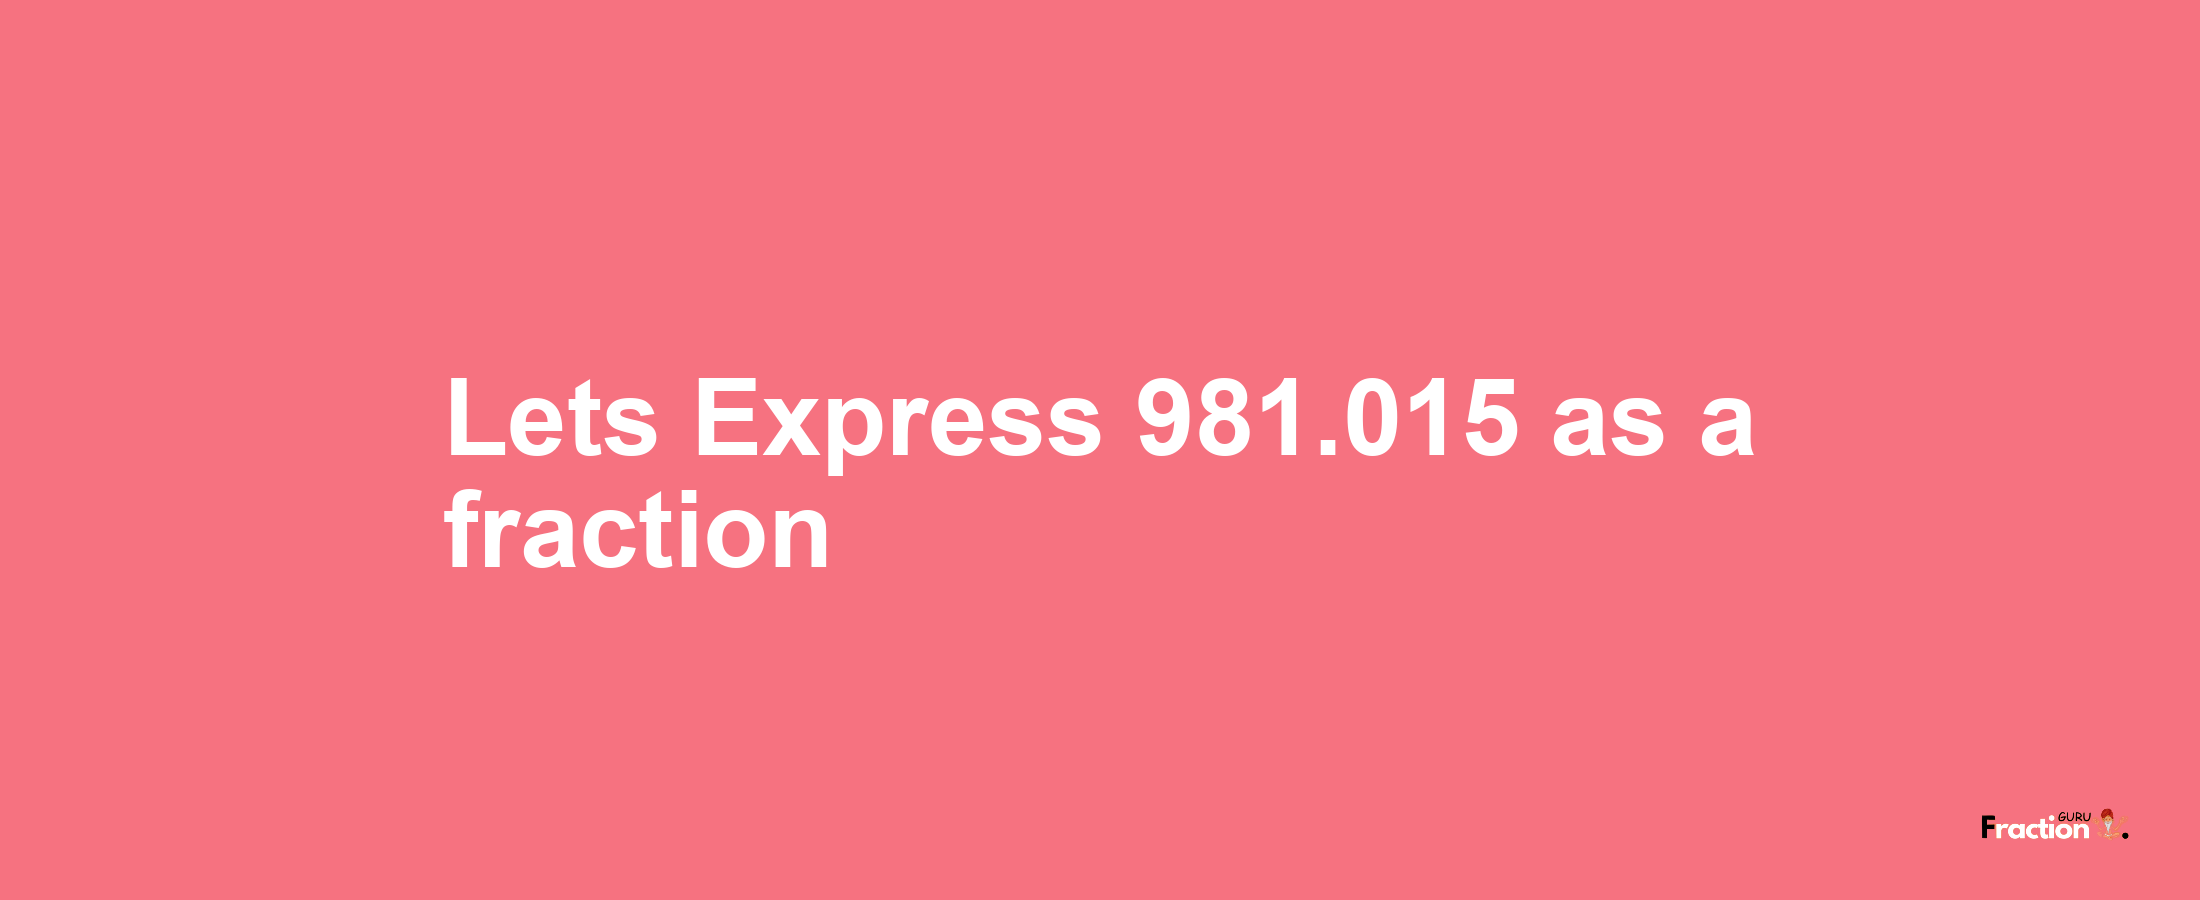 Lets Express 981.015 as afraction